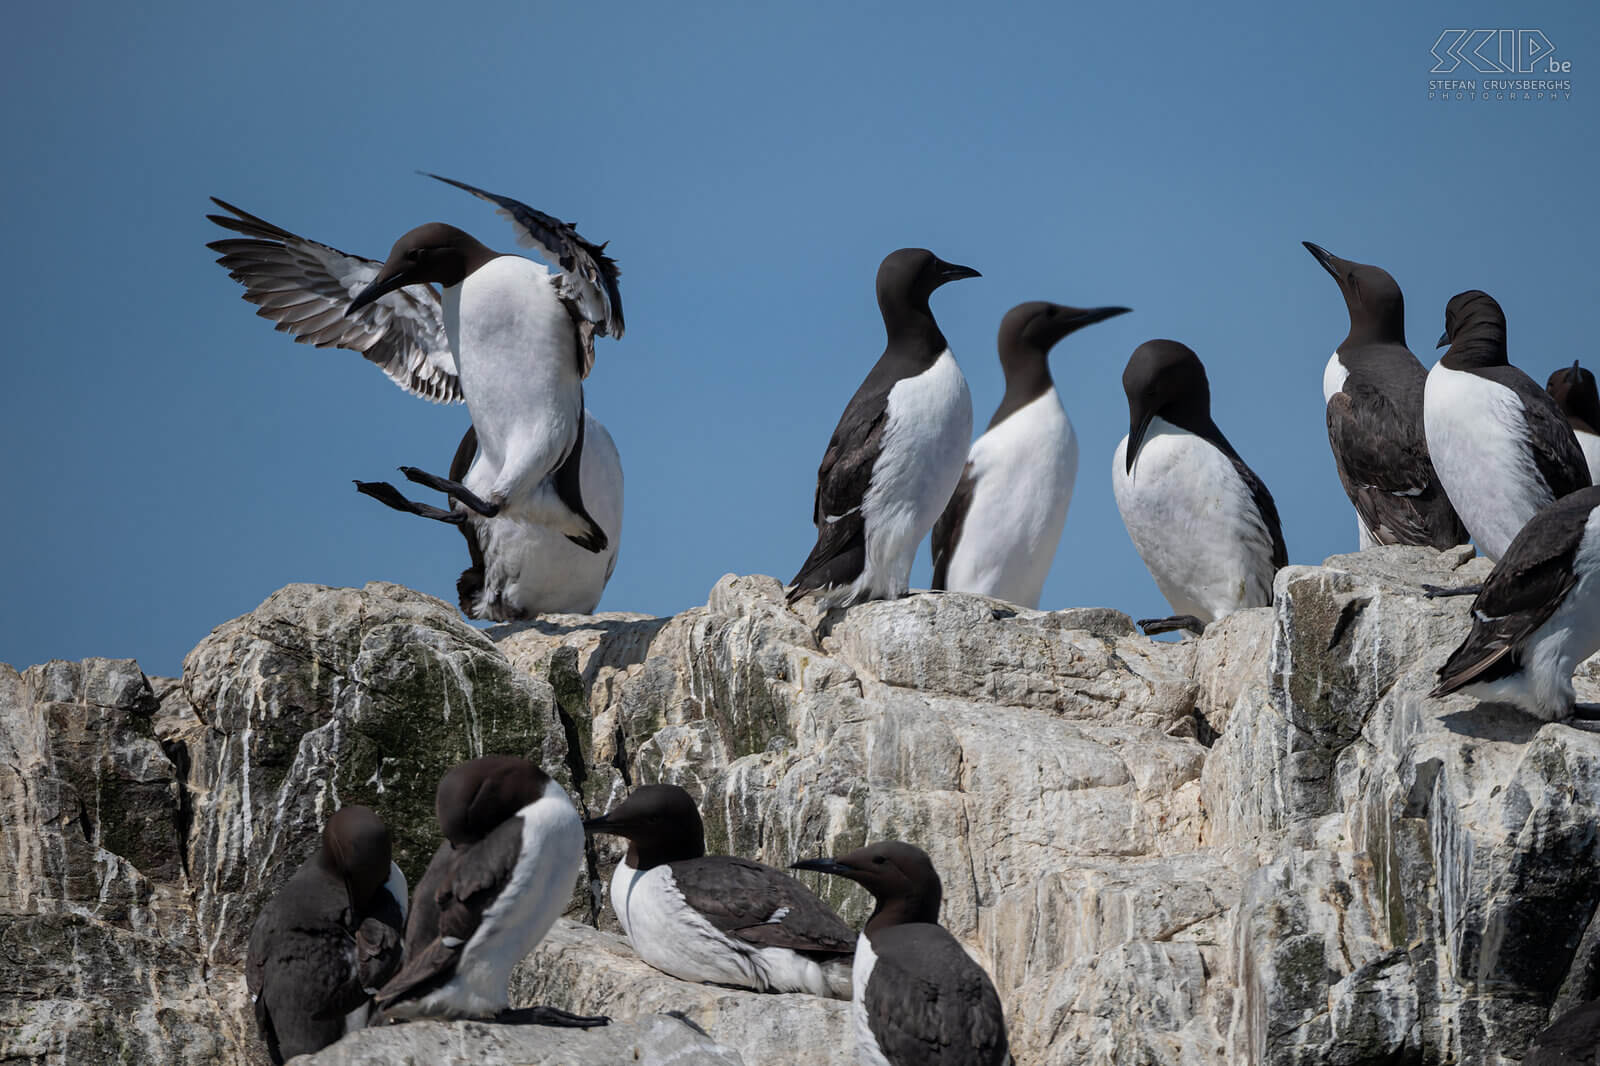 Farne Islands - Guillemots The Farne Islands are home to more than 25 nesting bird species. One of them is the guillemot. It is estimated that over 100,000 individual guillemots inhabit the island. Stefan Cruysberghs